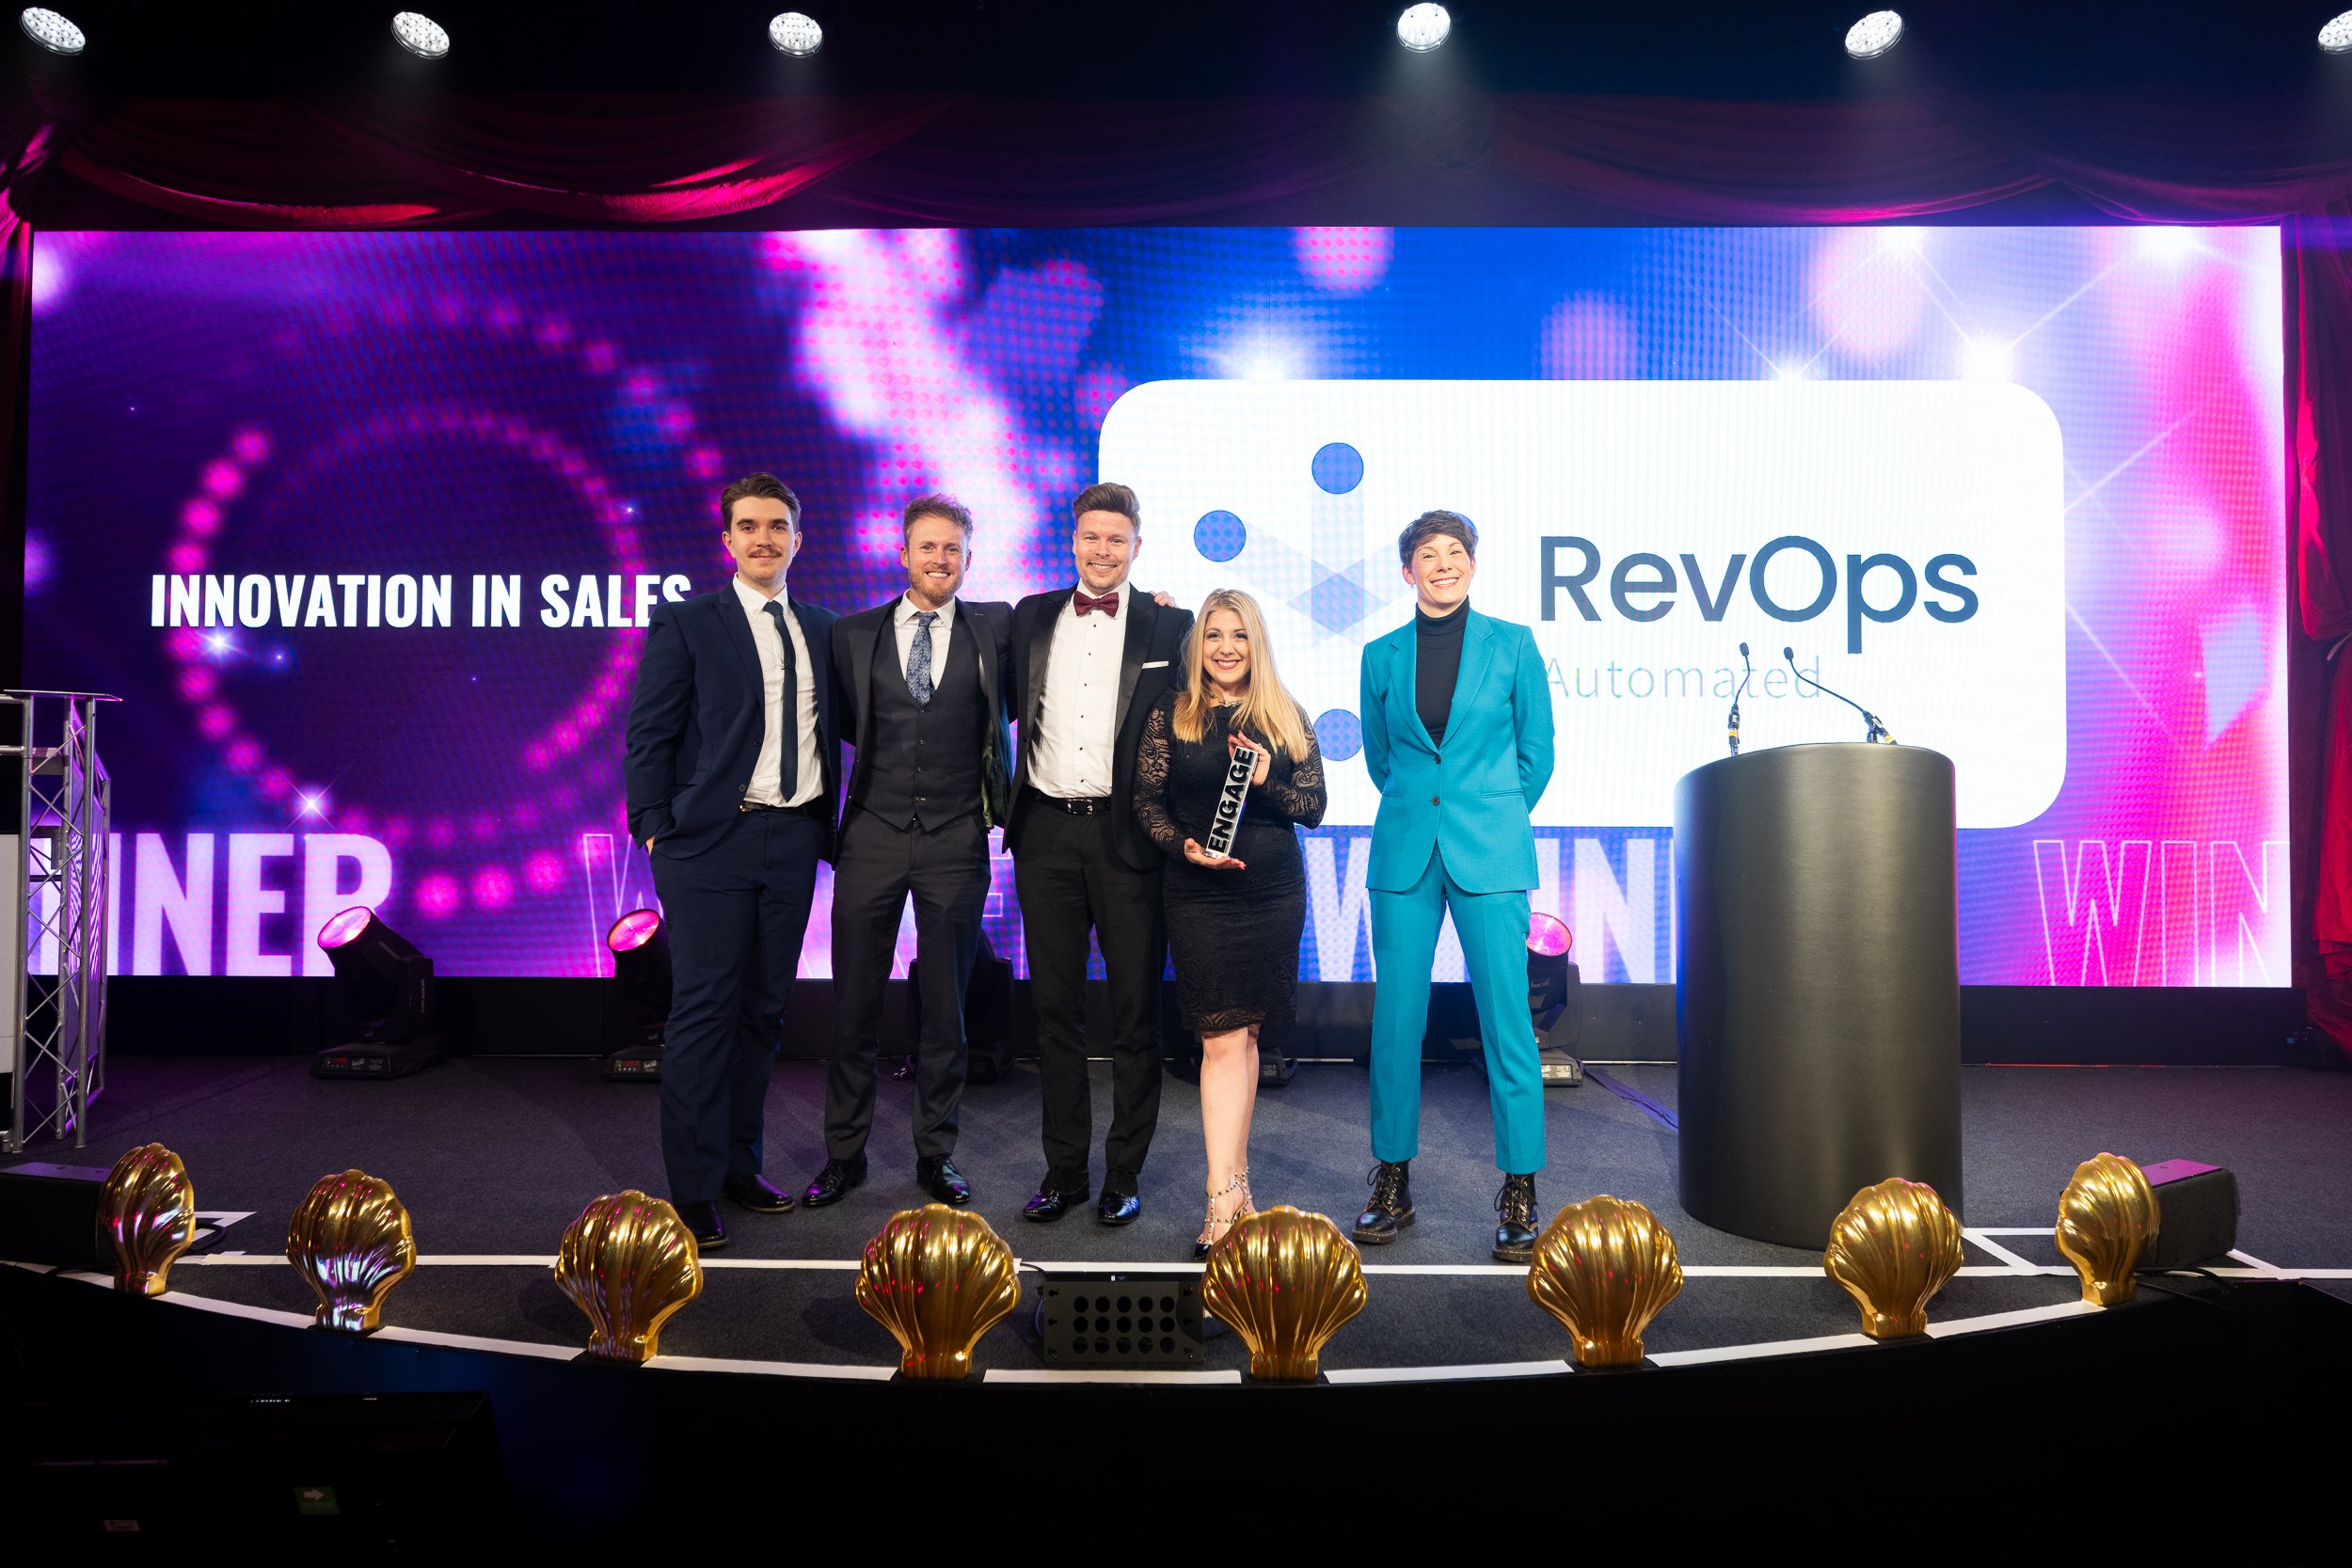 RevOps Automated winning the innovation in sales award